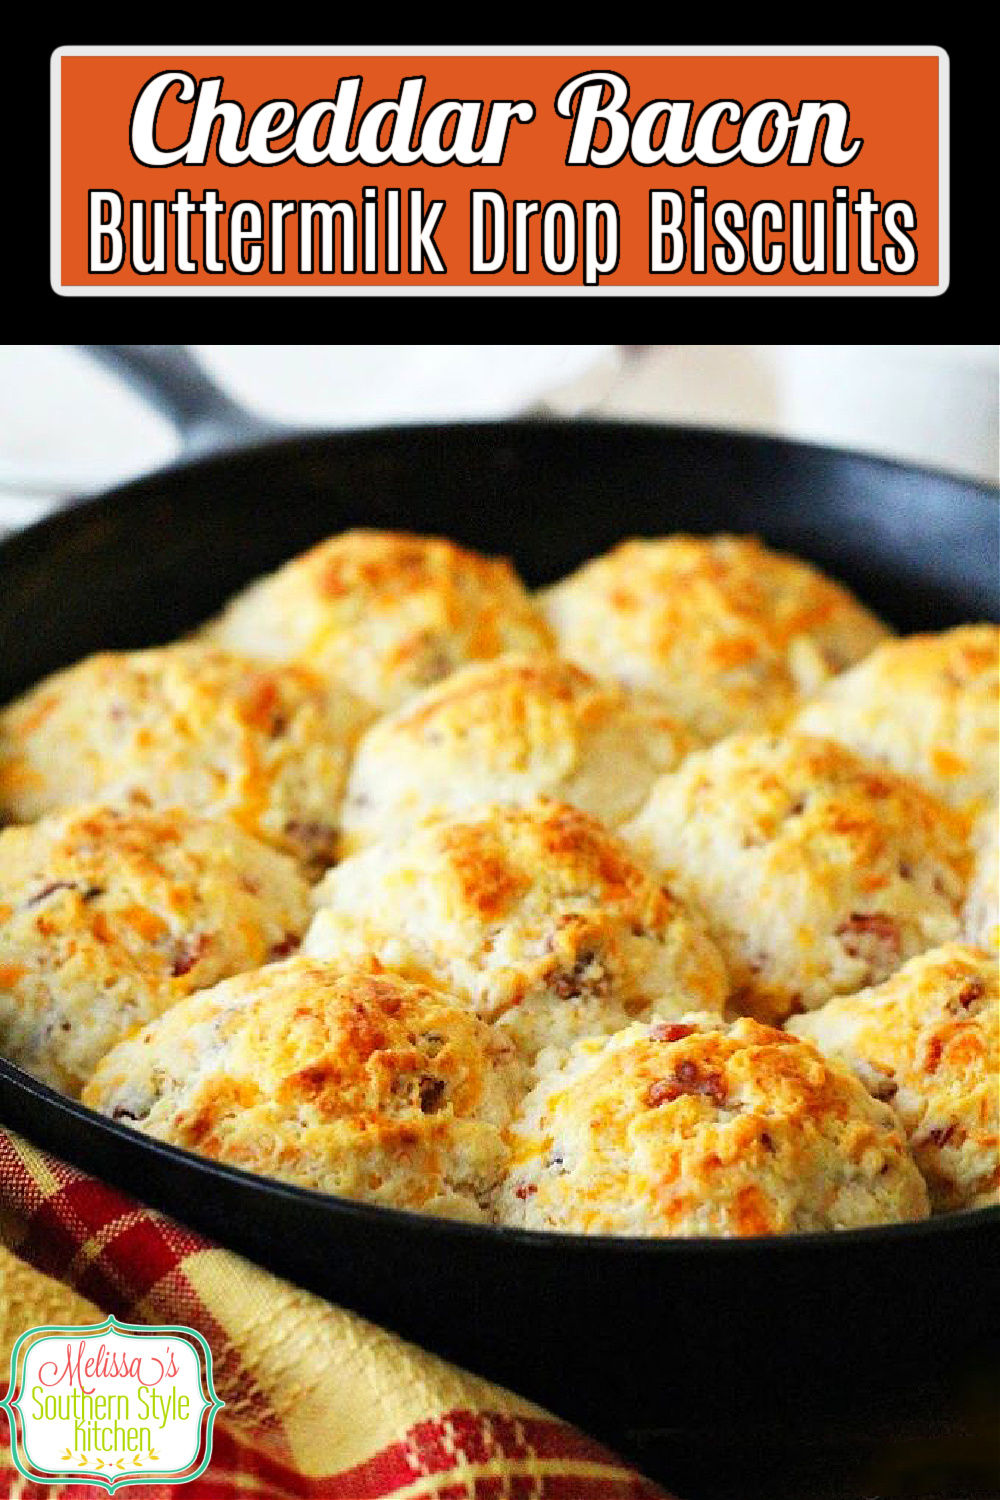 No rolling and cutting required to make these cheesy bacon biscuits #cheddarbaconbiscuits #dropbiscuits #buttermilkbiscuits #biscuitrecipes #bacon #southernbiscuits #southernfood #southernrecipes